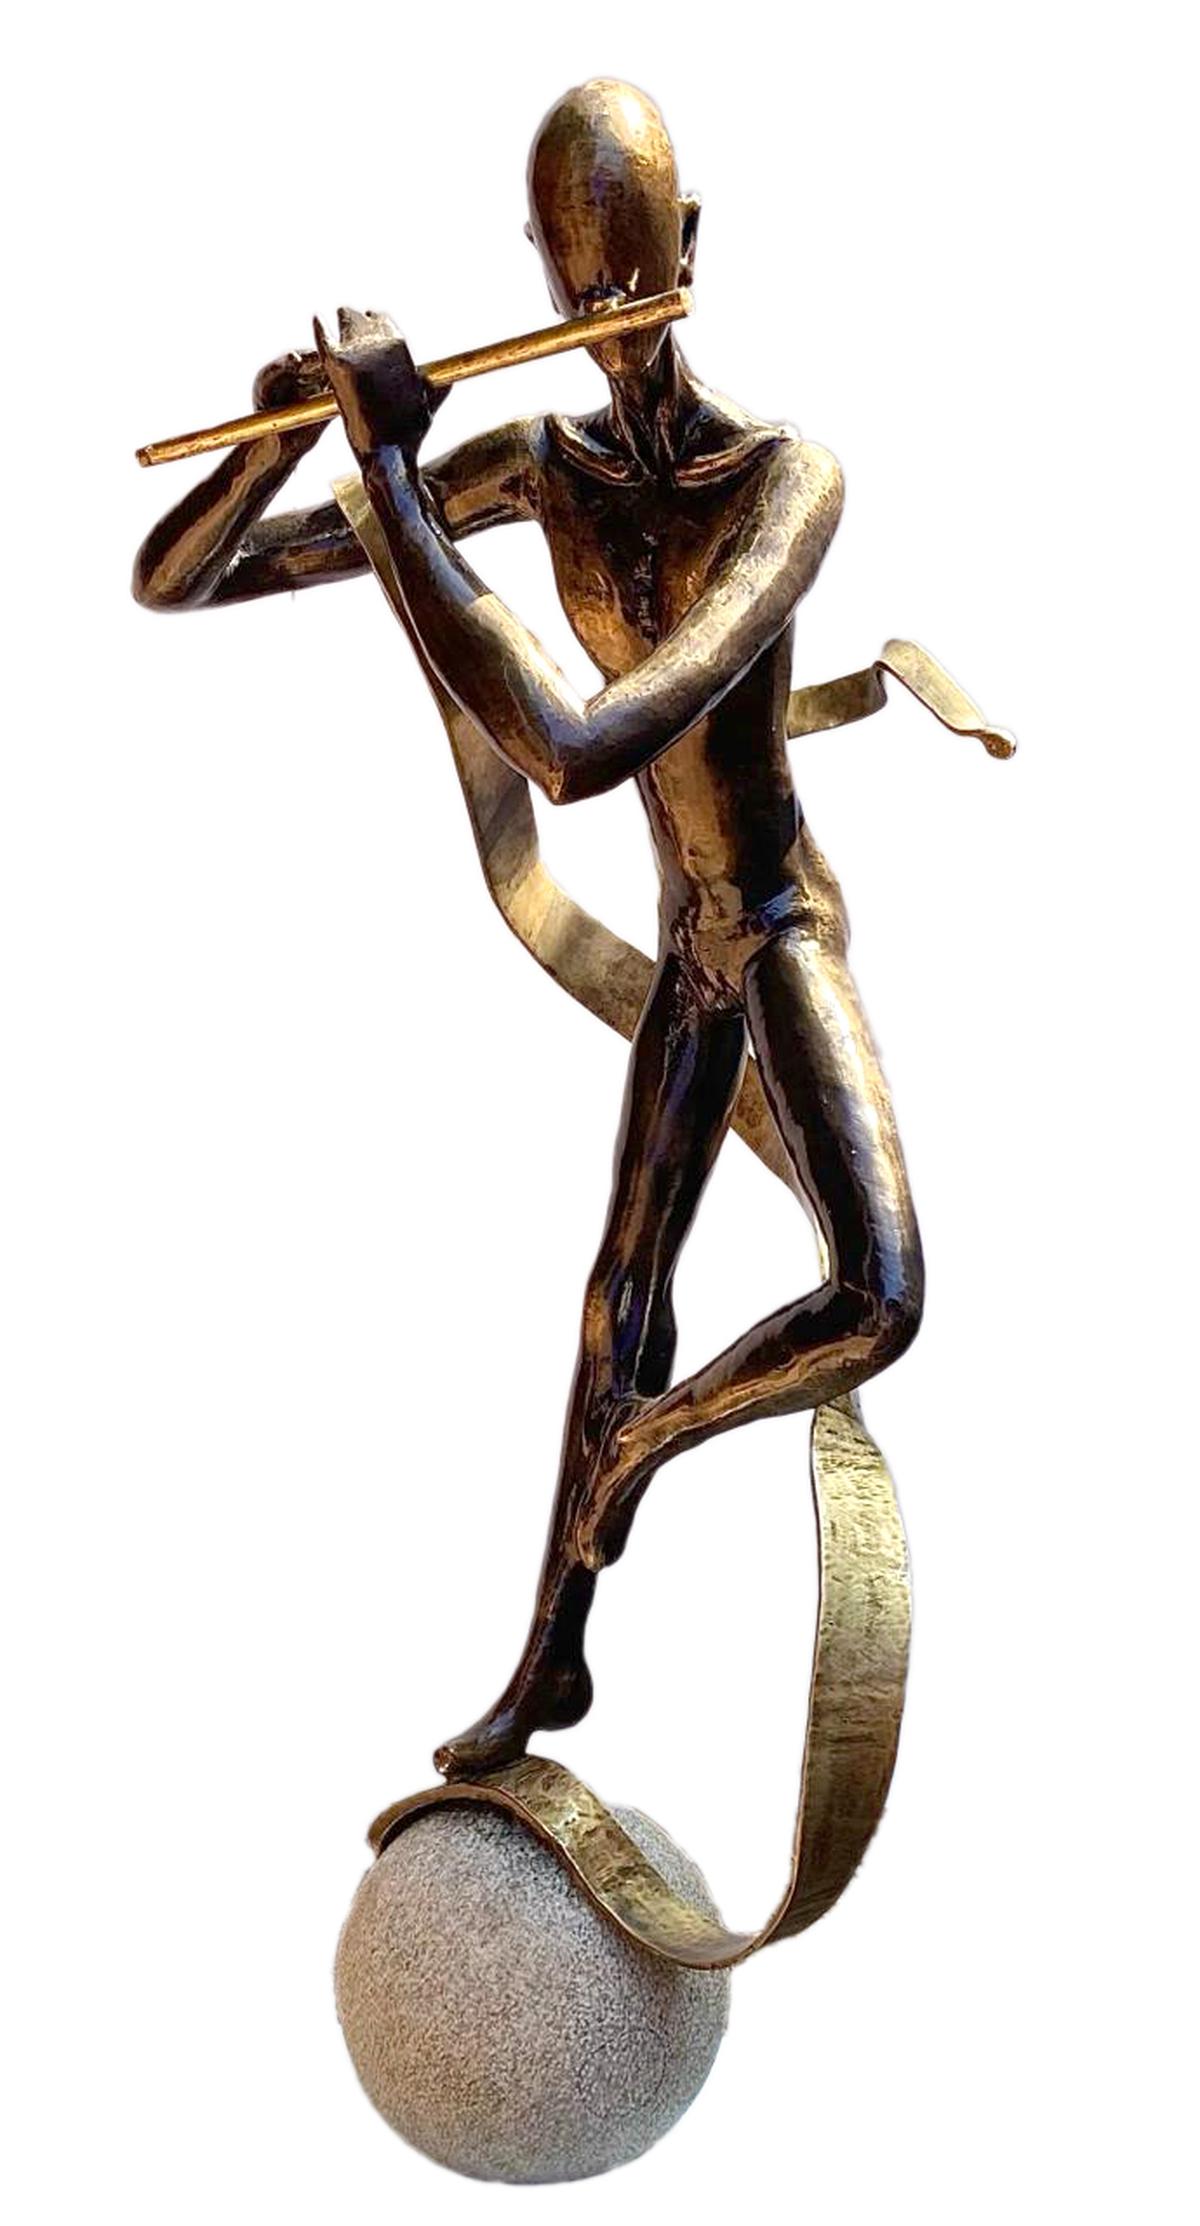 Divine Tune bronze sculpture by Dimpy Menon on Show at Gallery Art Positive 